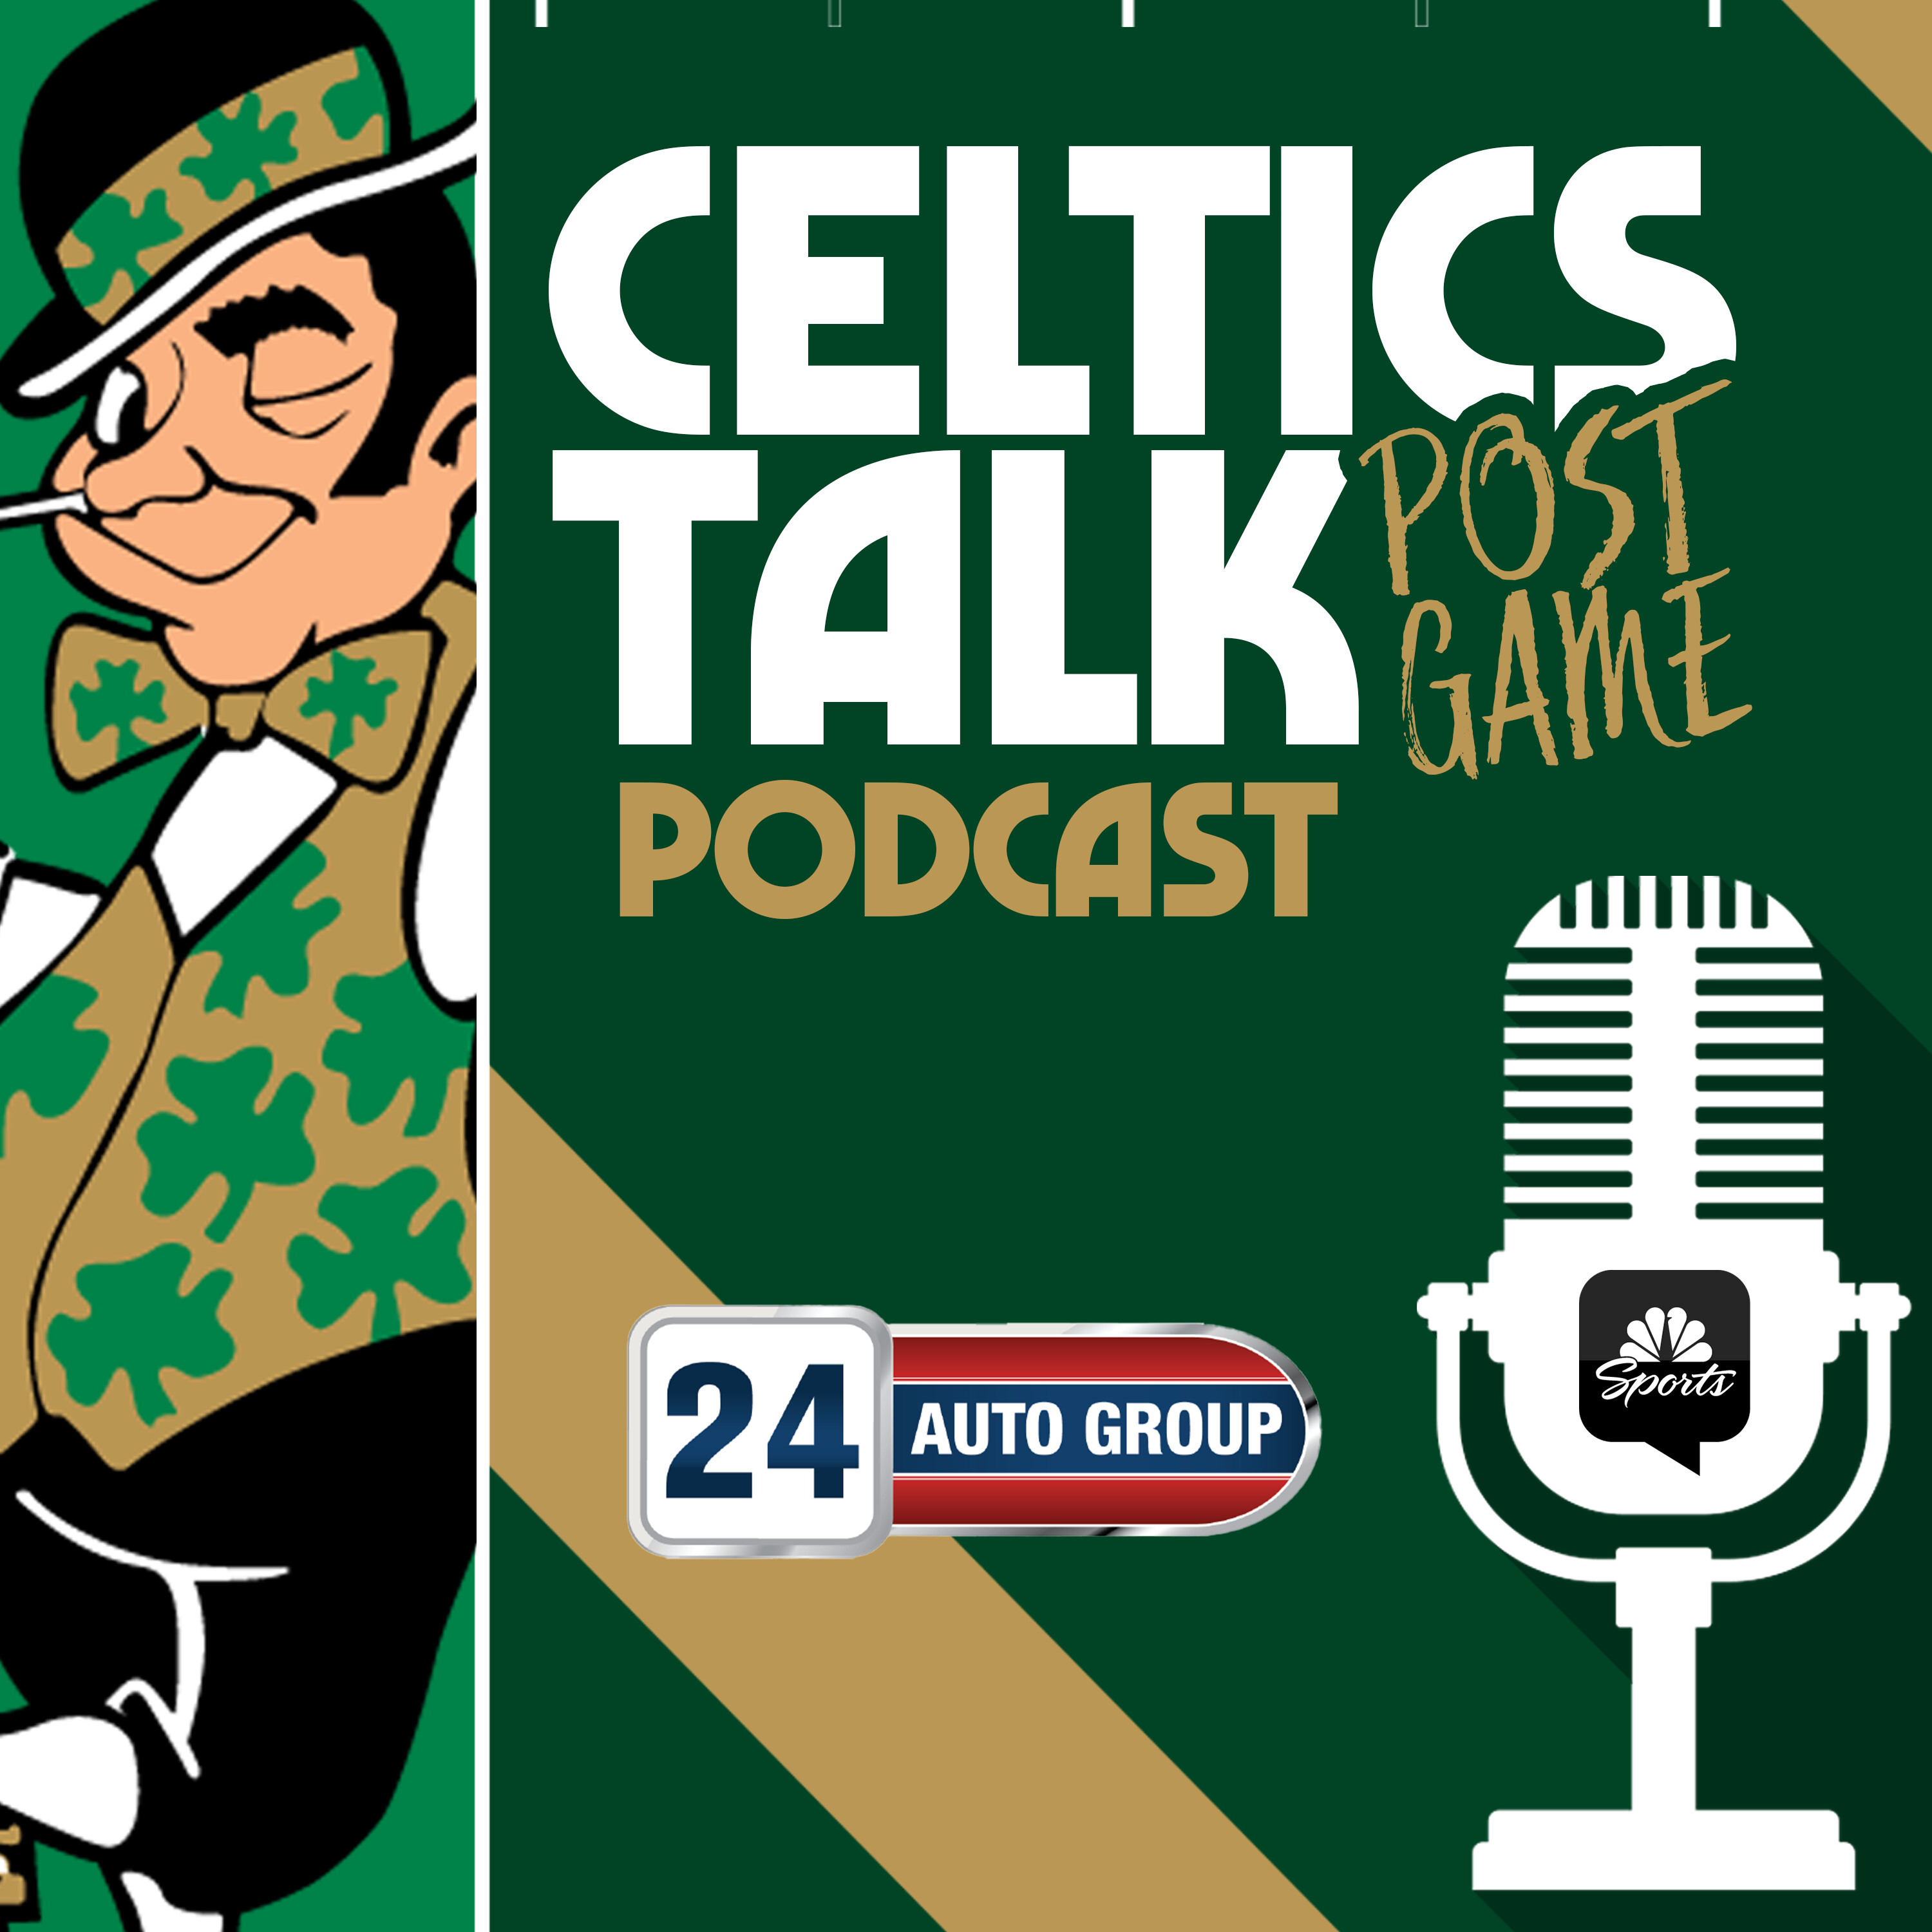 POSTGAME POD: Celtics set franchise record in win over Knicks, Rob Williams interview & update on injury